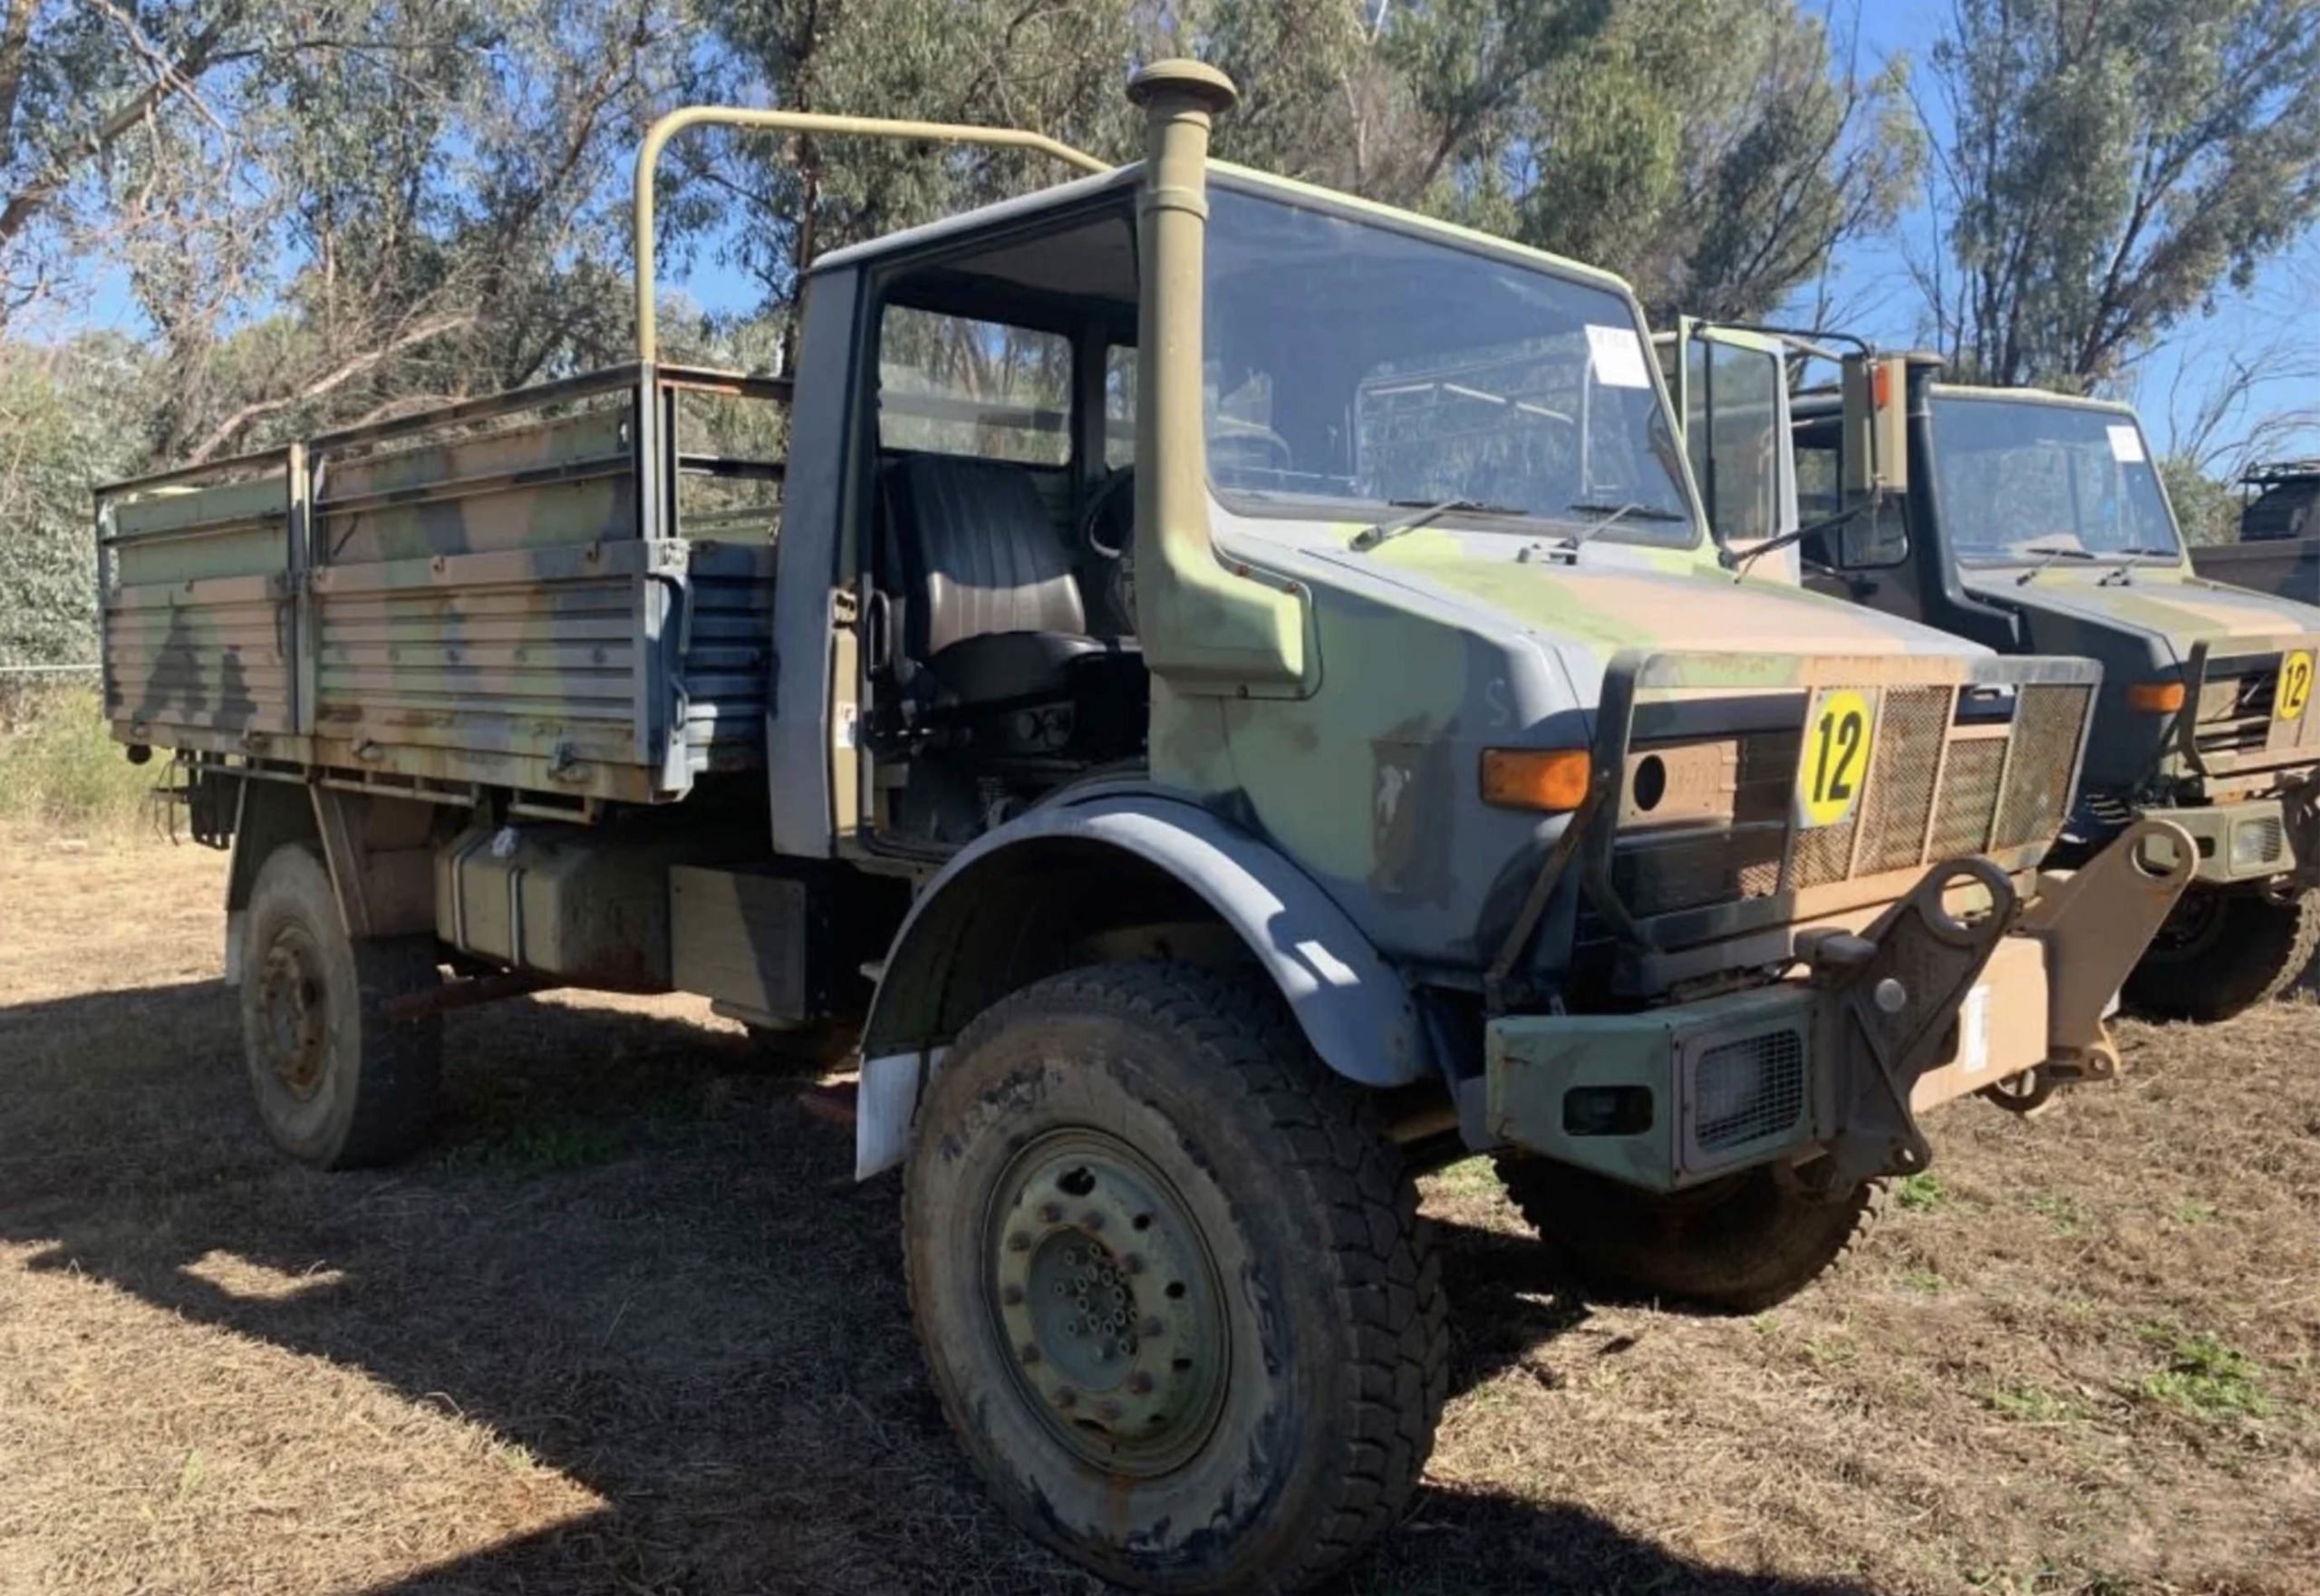 There’s A Fleet Of Ex-Australian Army Unimogs For Sale (Individually)